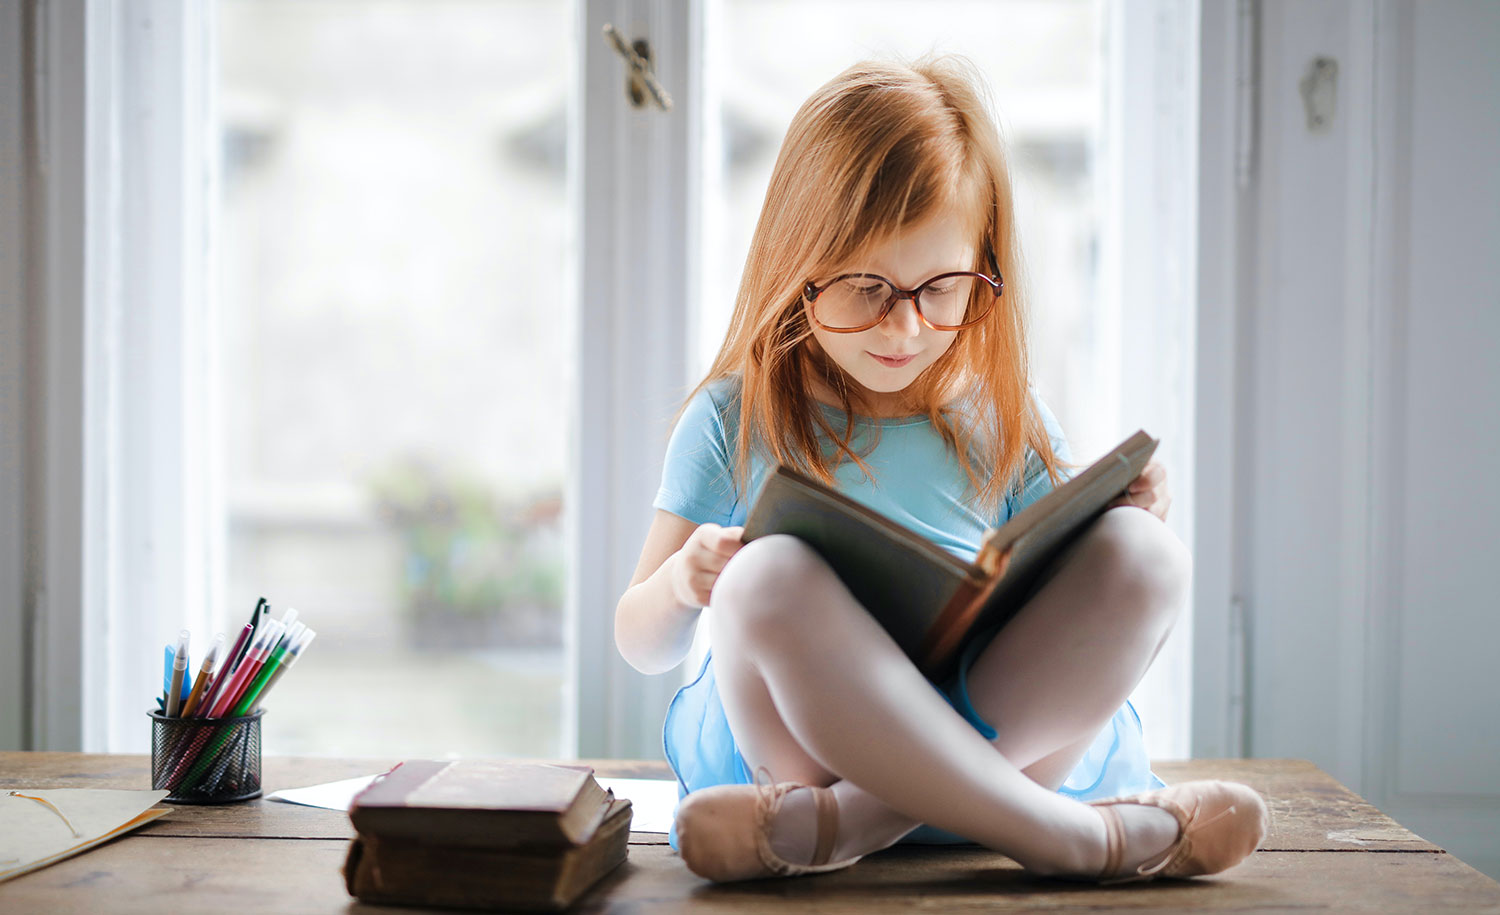 An introverted child reads a book